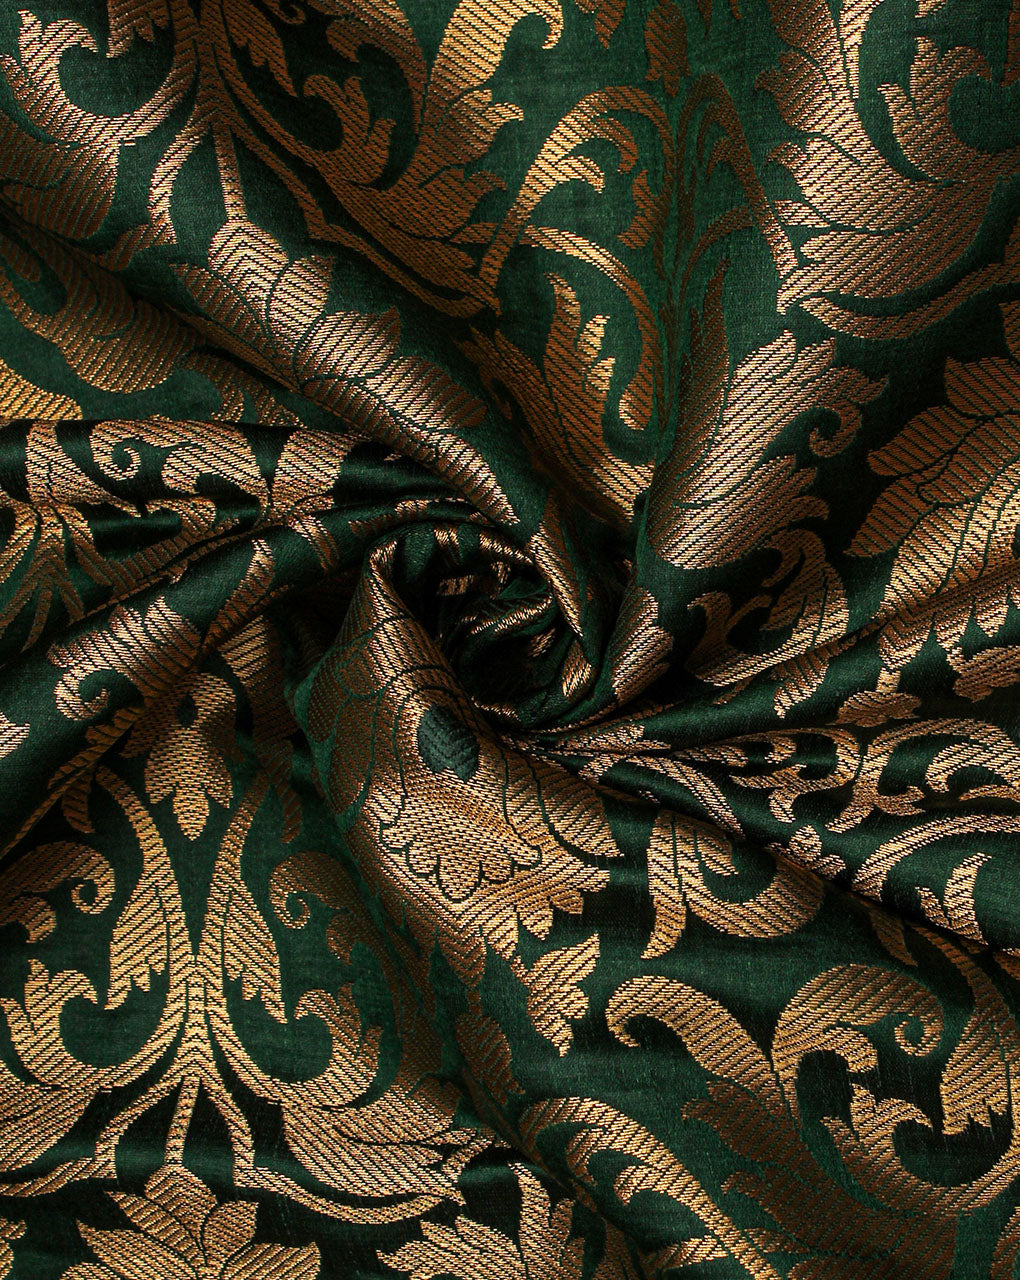 Green And Golden Floral Design Polyester Brocade Fabric